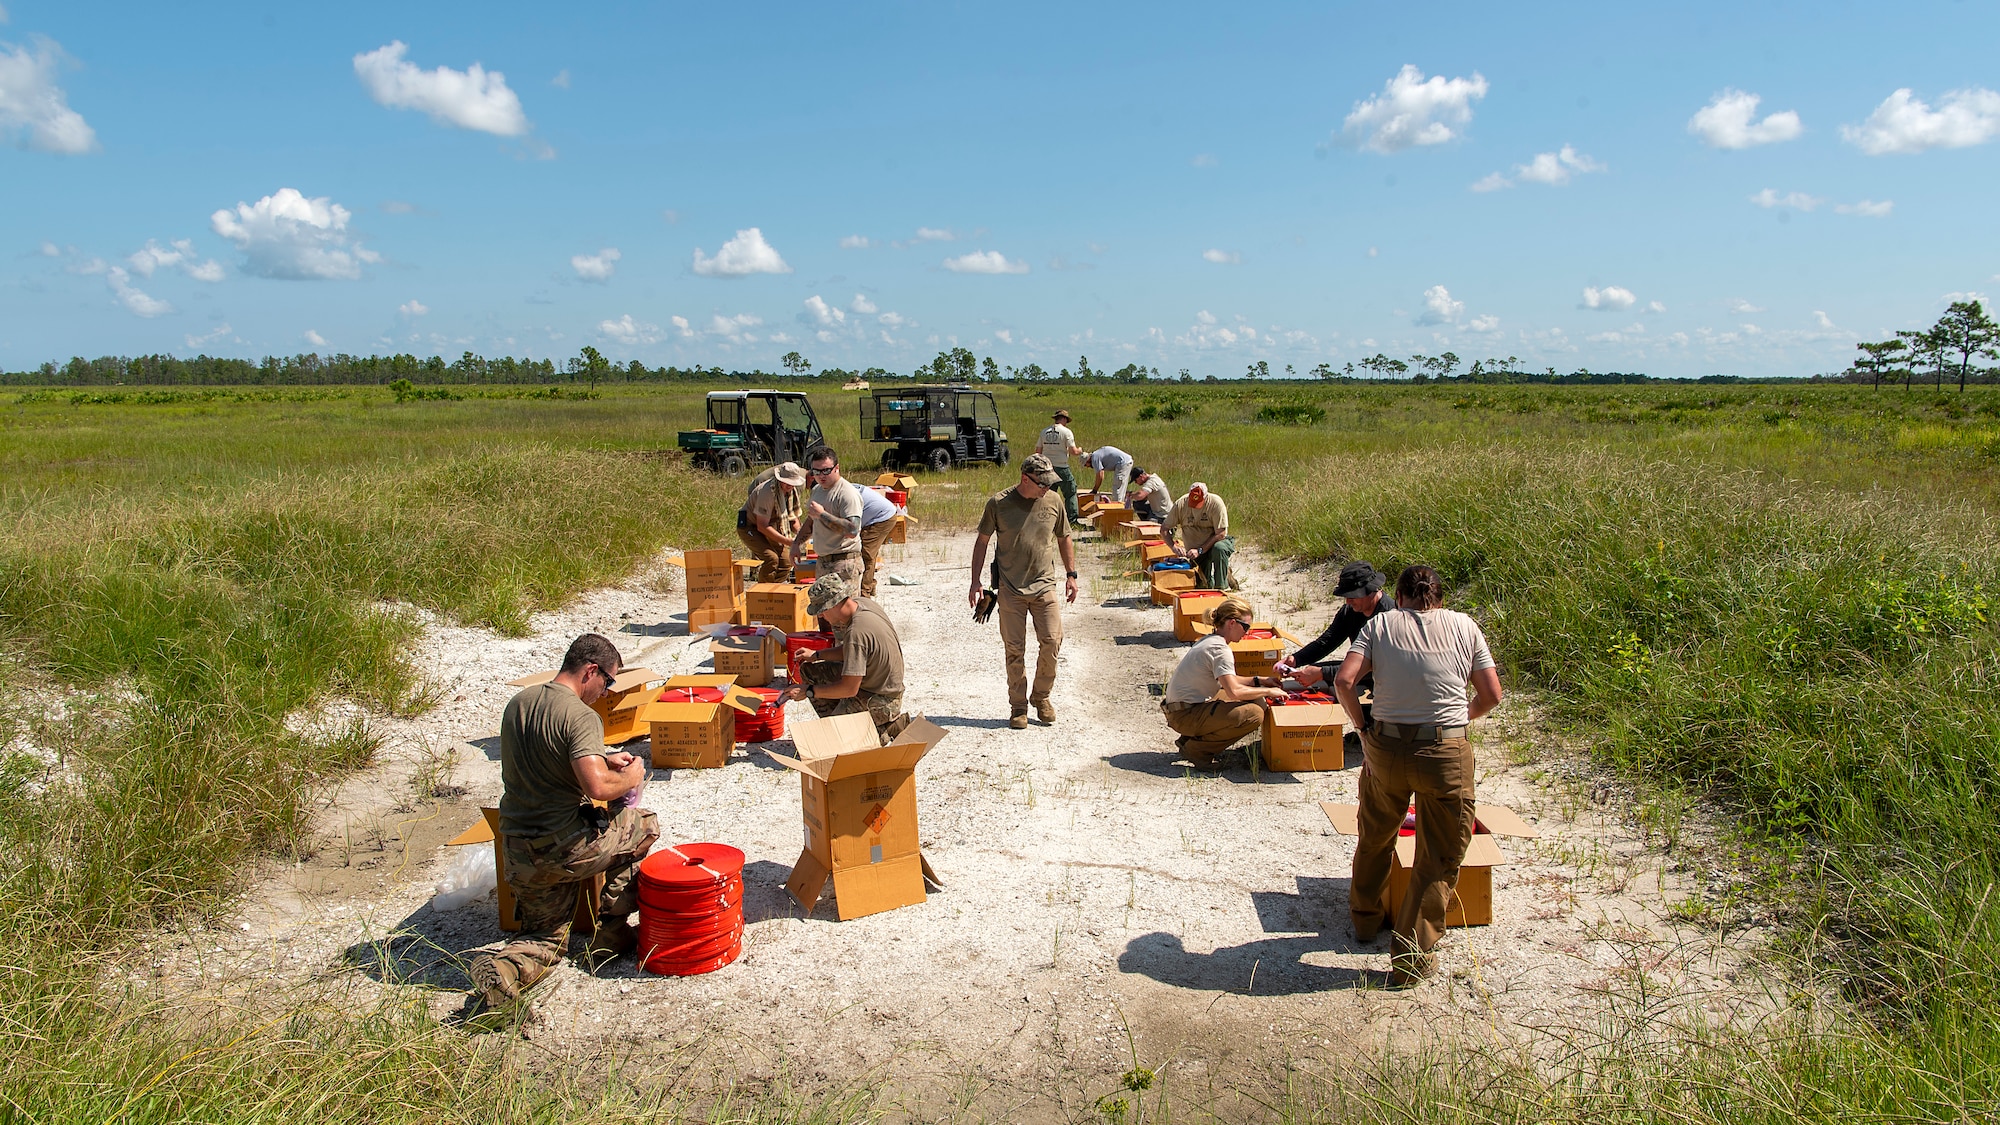 Members of the 6th Civil Engineer Explosive Ordnance Disposal Flight, the Bureau of Alcohol, Tobacco, Firearms and Explosives, and other local and state authorities, prepare to detonate evidence left over from a federal case during a joint training disposal procedure at the Avon Park Air Force Range, Fla., Sept. 9, 2019. The agencies disposed of the more than 7,000 pounds of explosives through controlled detonations.